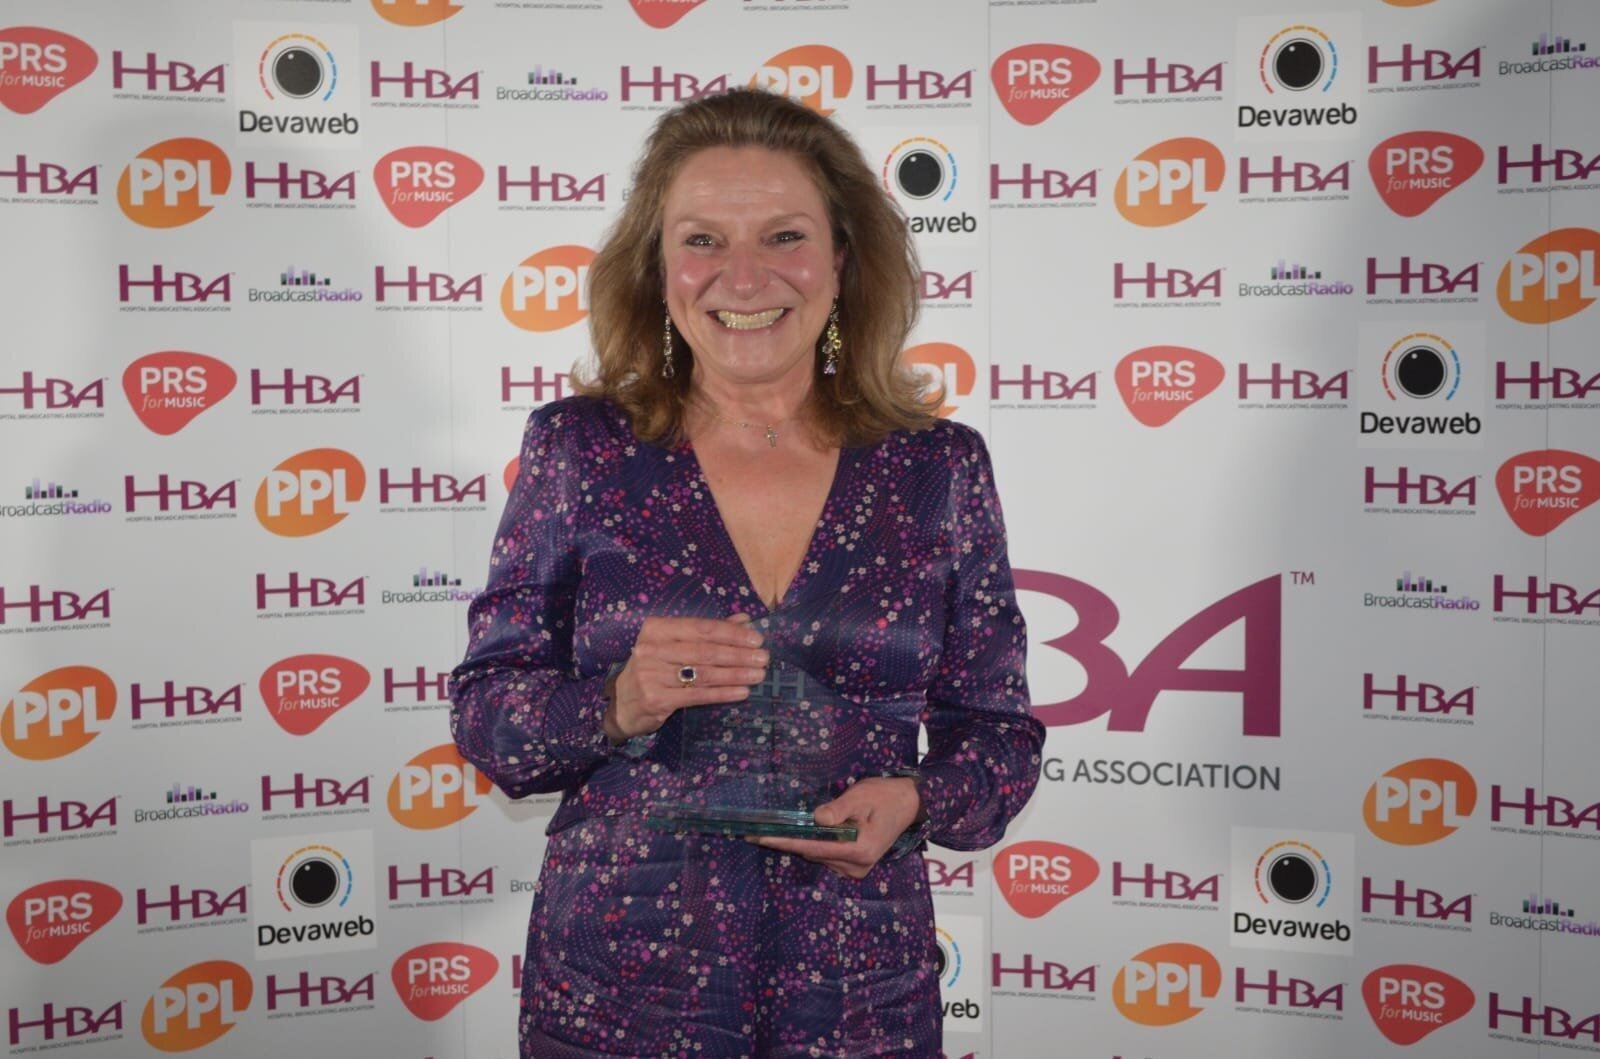 Virginia Irvine-Fortescue was named Best Female Presenter of the Year at the awards.